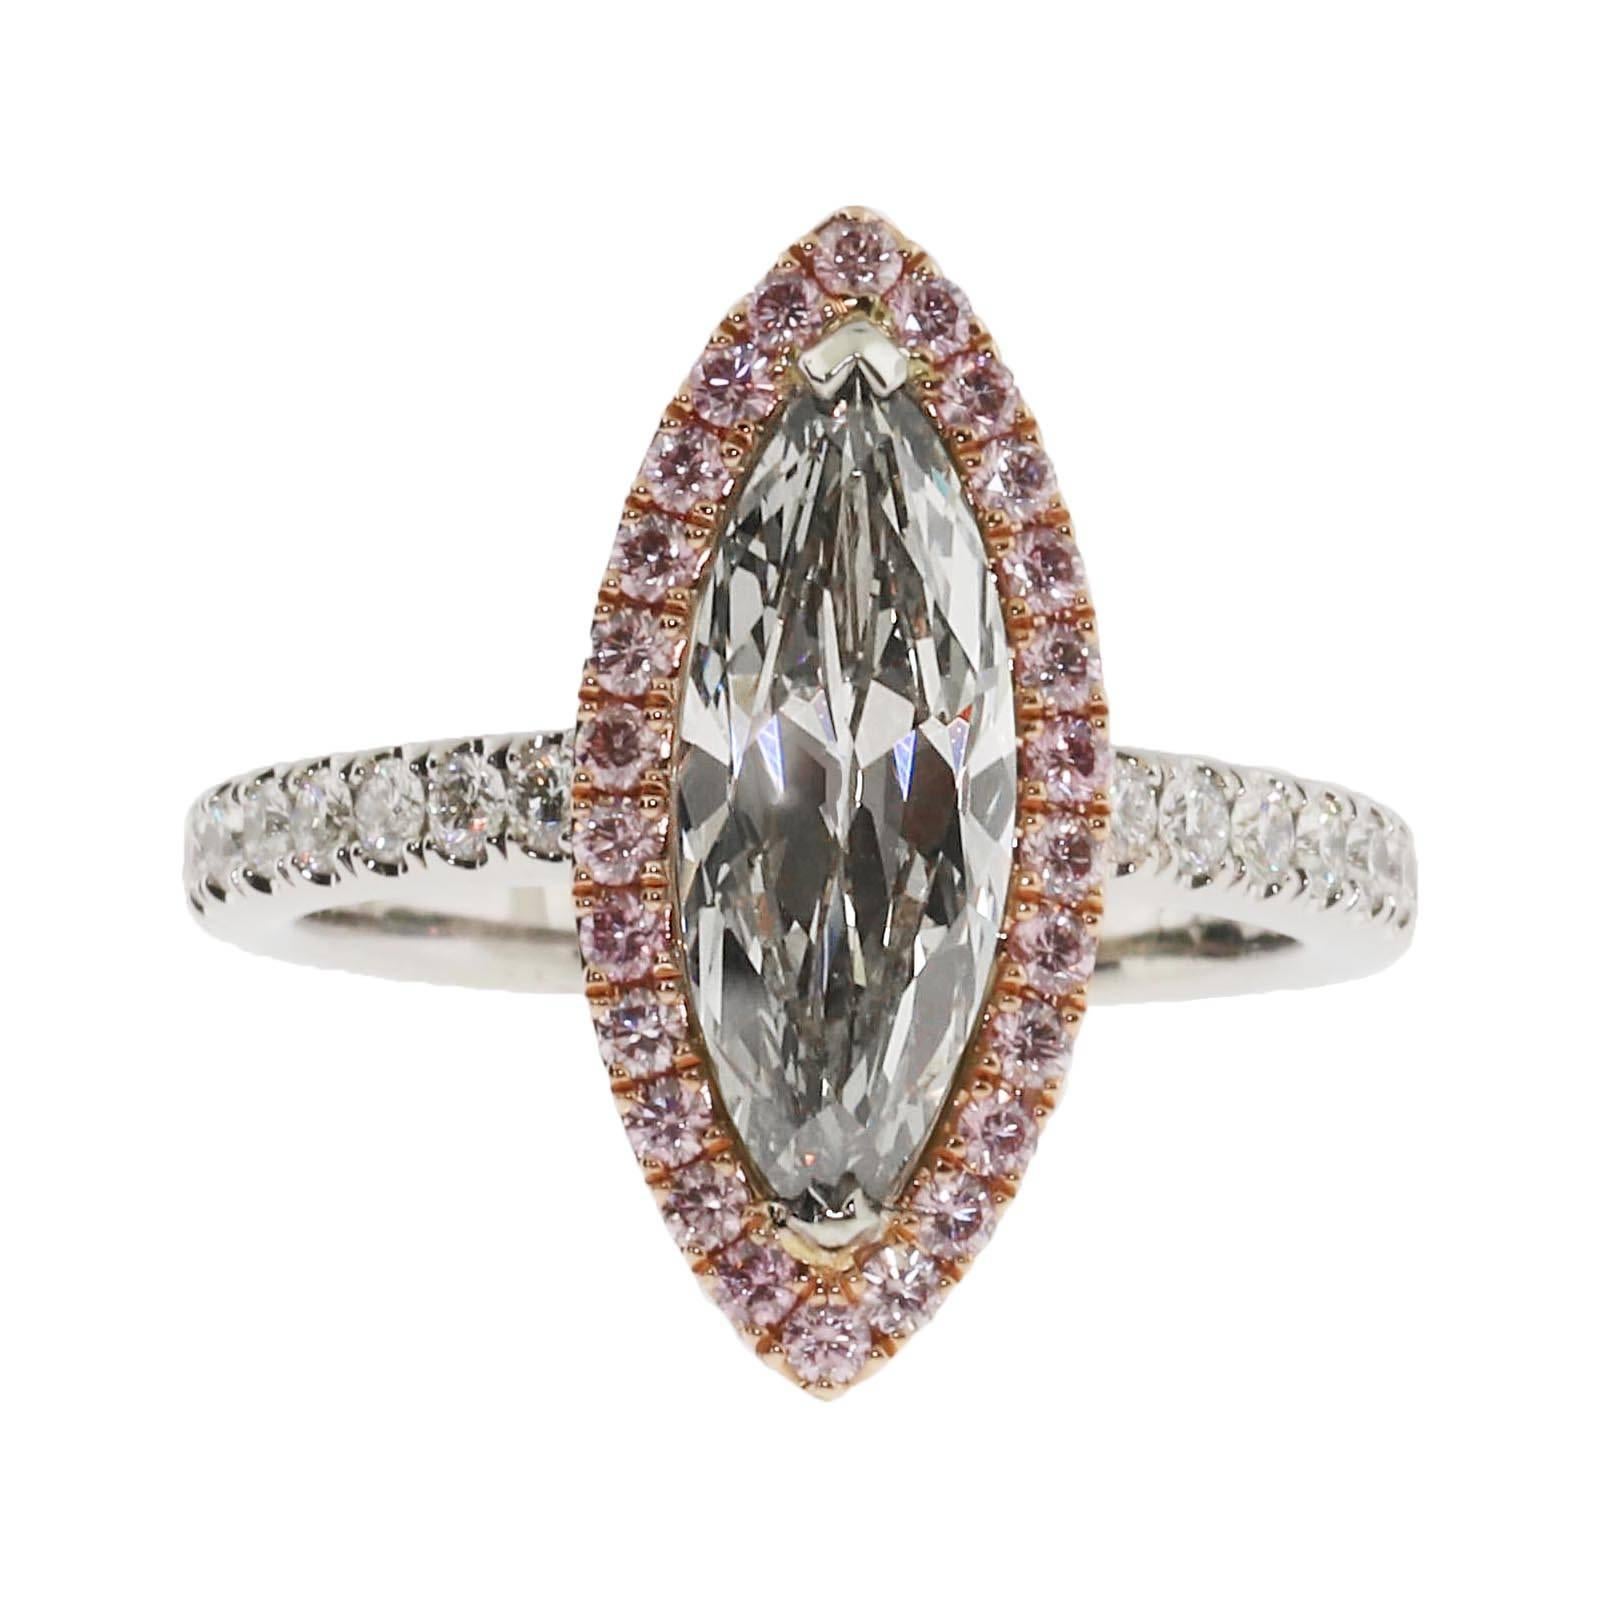 One of the rarest colored diamonds available on 1stDibs. This 2.05 Fancy Grey diamond ring is adorned with a natural pink diamond halo around the exterior of the marquise. The clarity grade of the 2.05 is a VS2 which means it is a very clean center